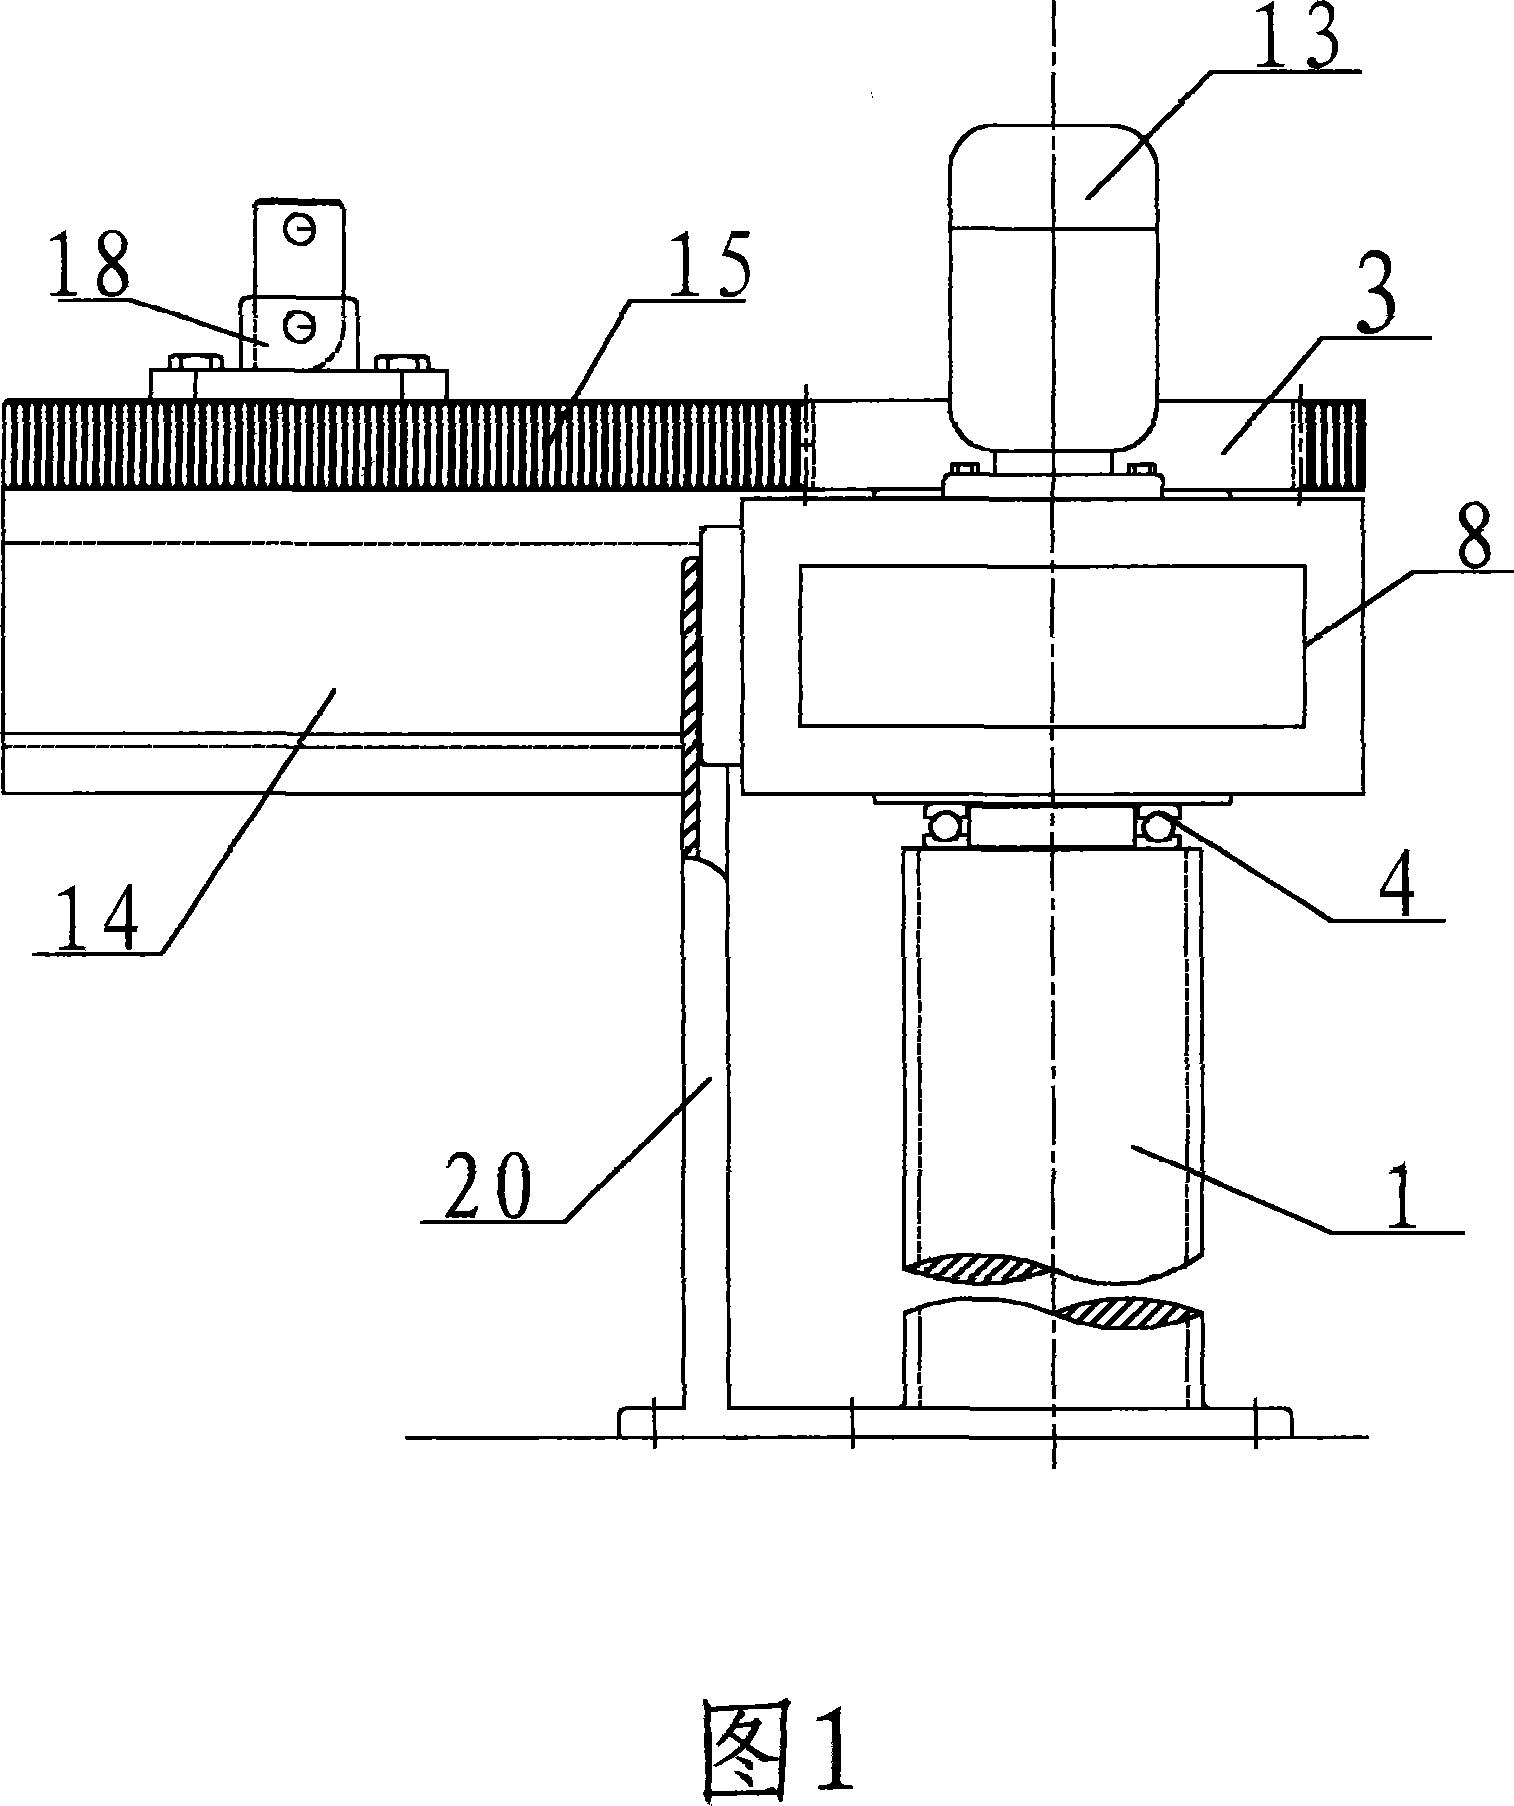 Movable joint screw-threaded shaft lifting shifting apparatus